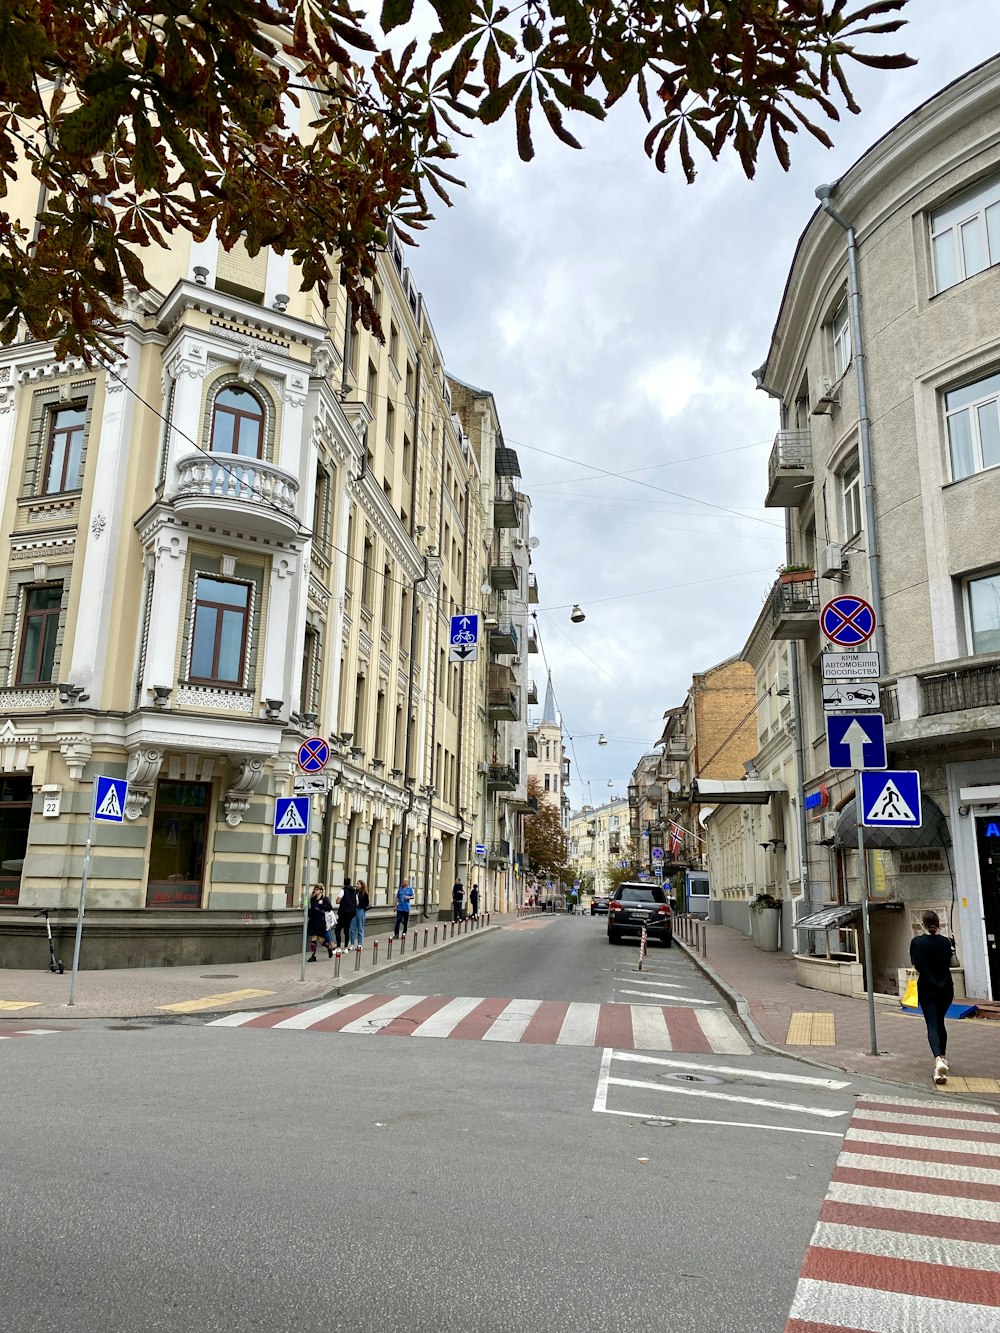 a city street with buildings and a crosswalk